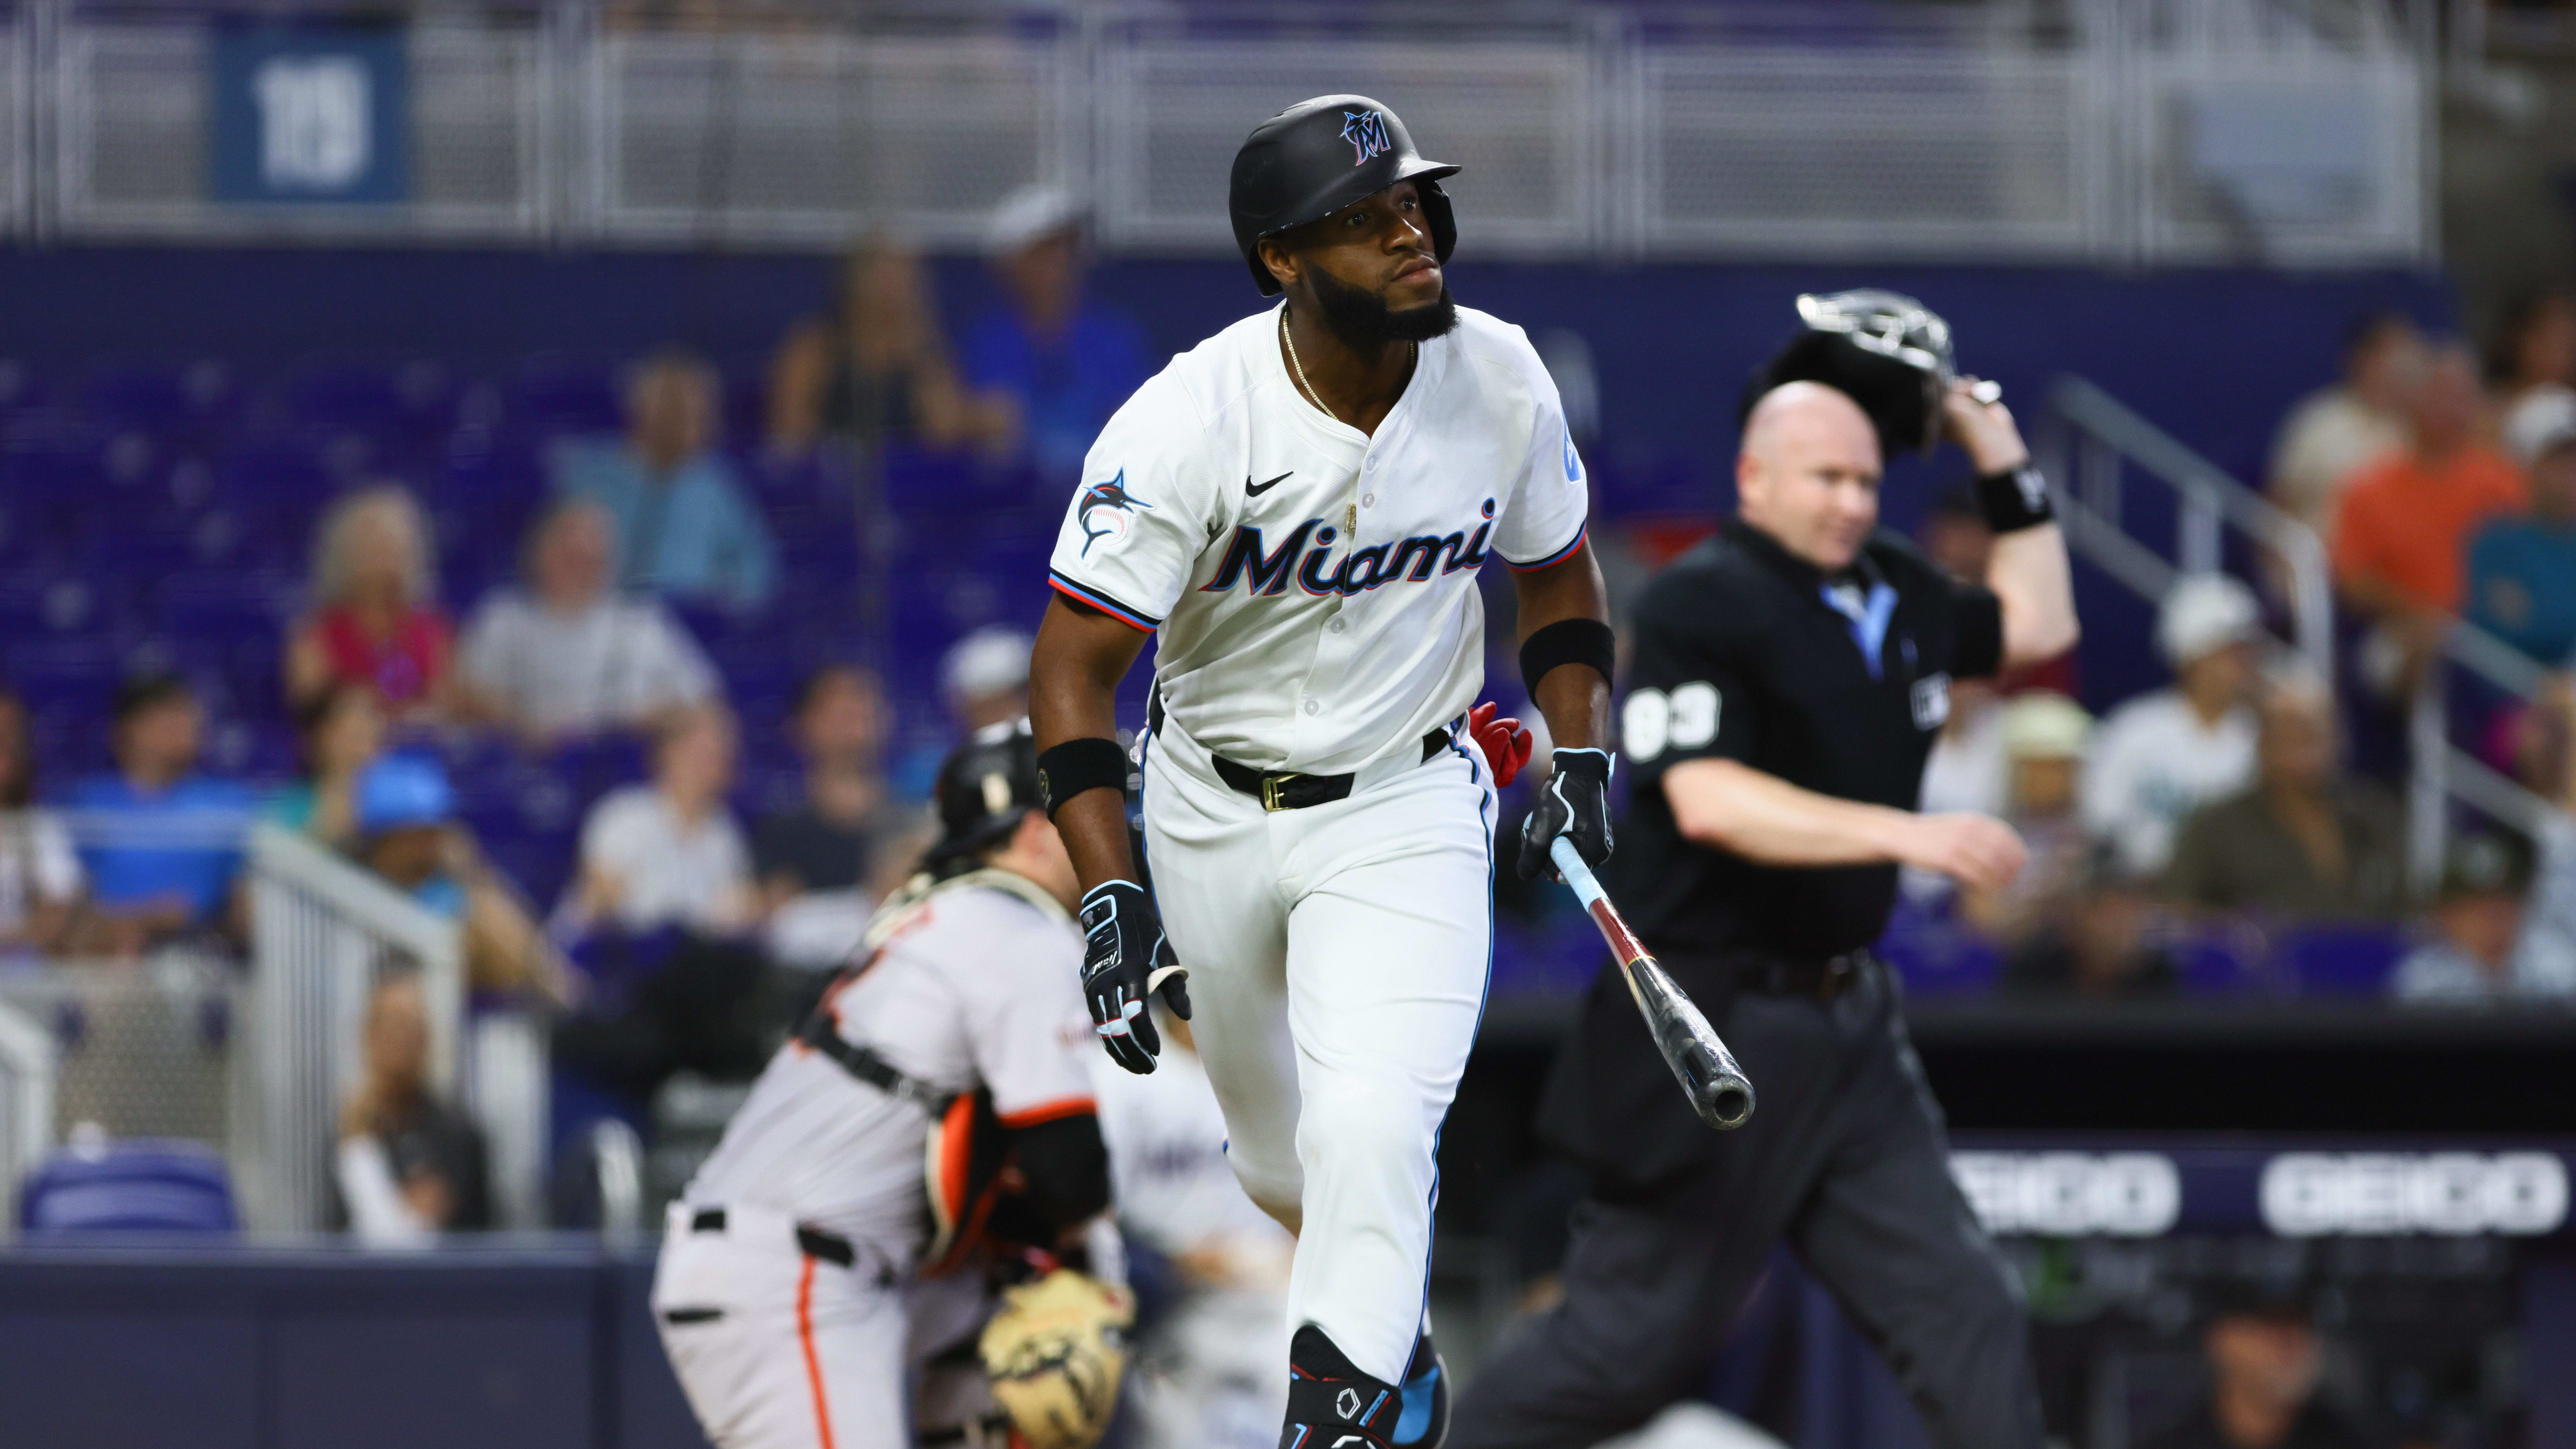 NL East Recap: Miami Marlins’ Offense Falters, Braves, Phillies, Mets, and Nationals Secure Wins on Wednesday